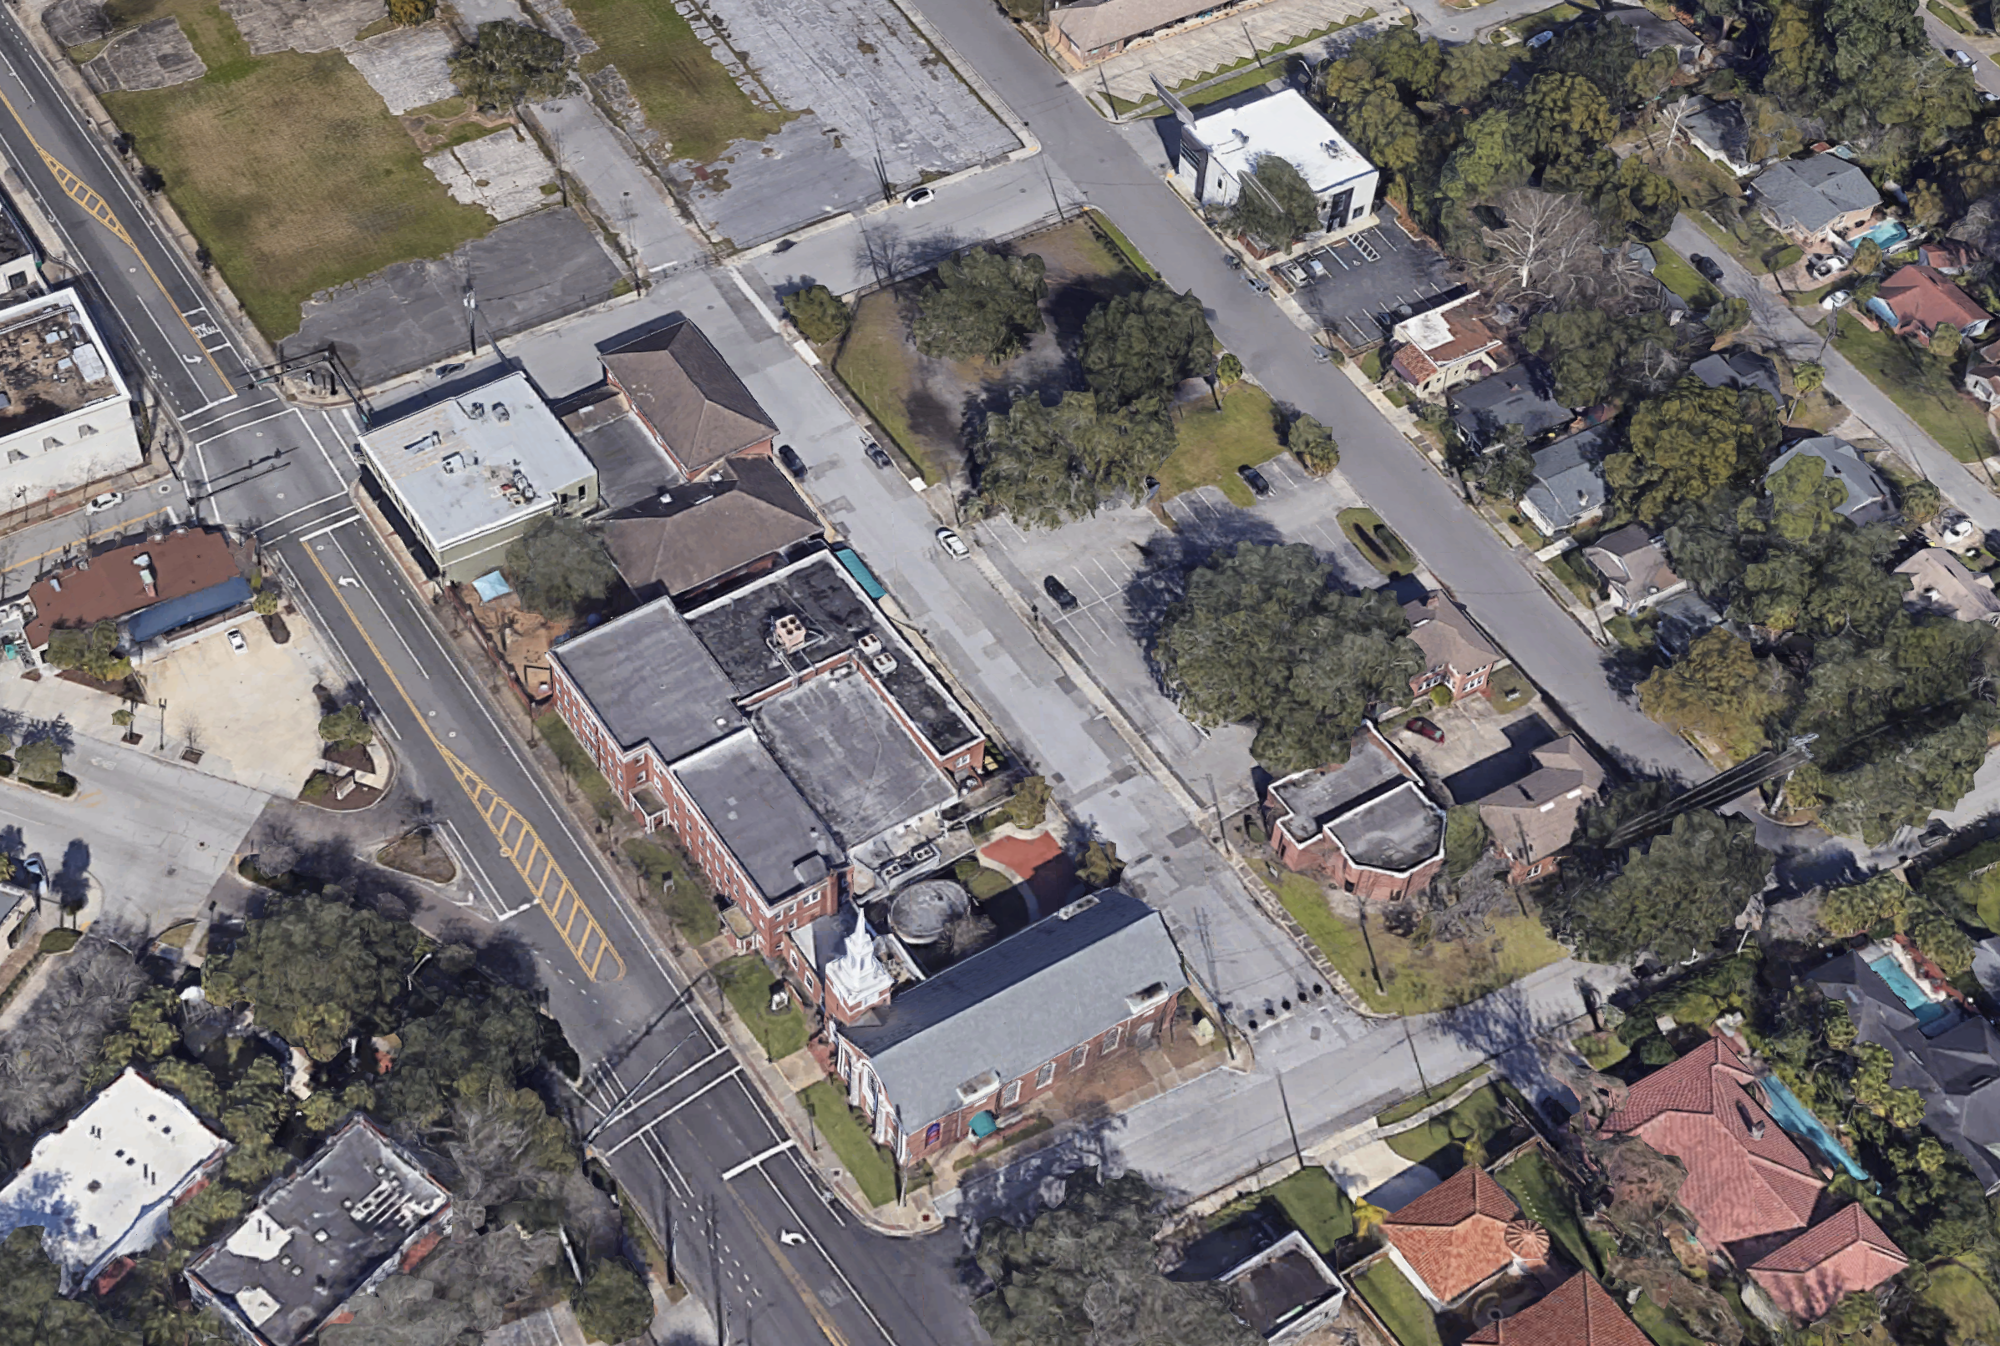 The apartments are planned for this area adjacent to South Jacksonville Presbyterian Church.